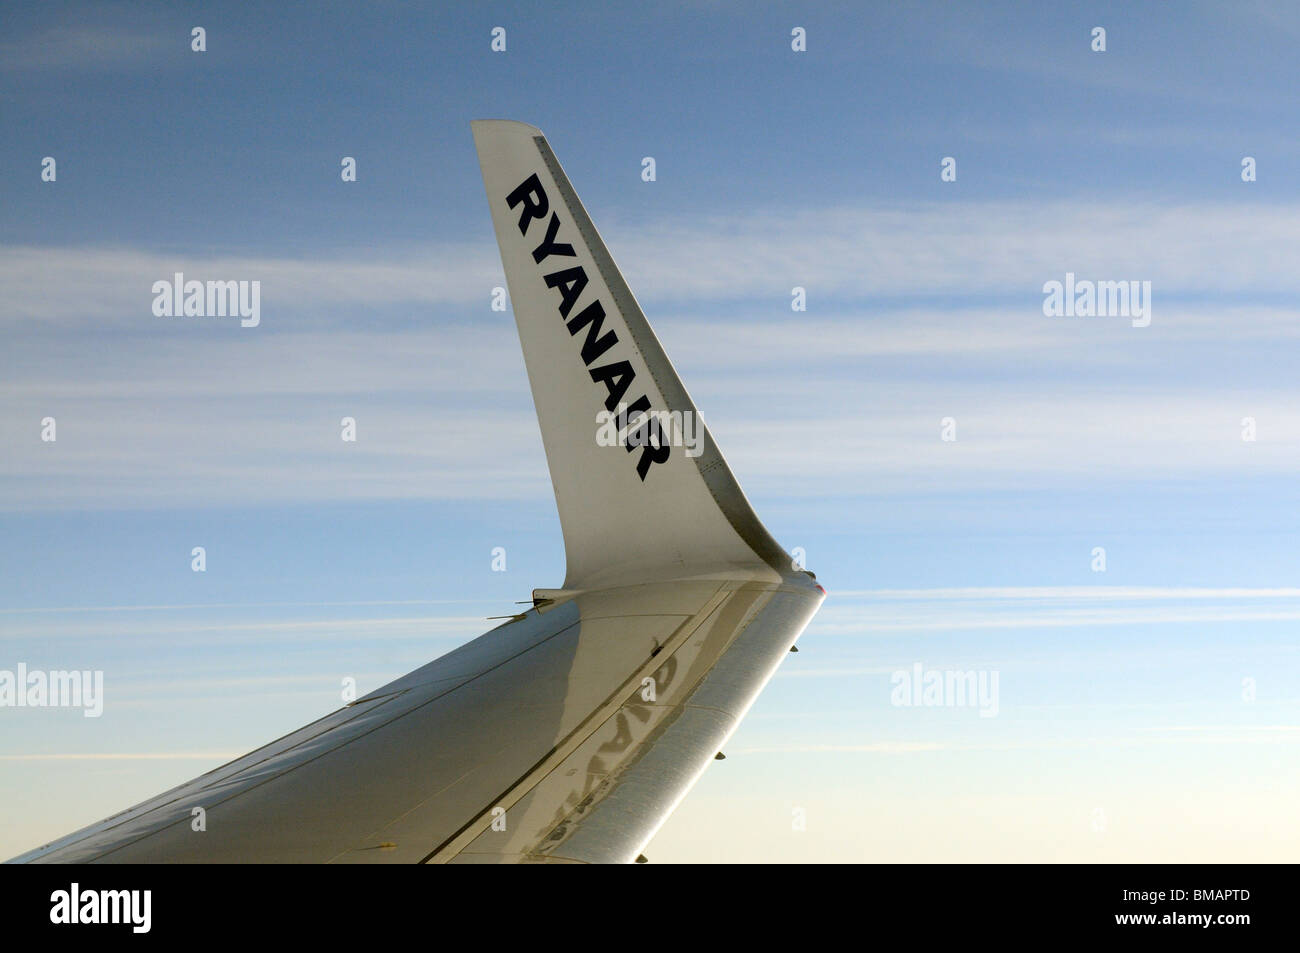 Aircraft winglet carrying the name Ryanair a low cost European airline and open skies backdrop seen from the cabin of a Boeing Stock Photo